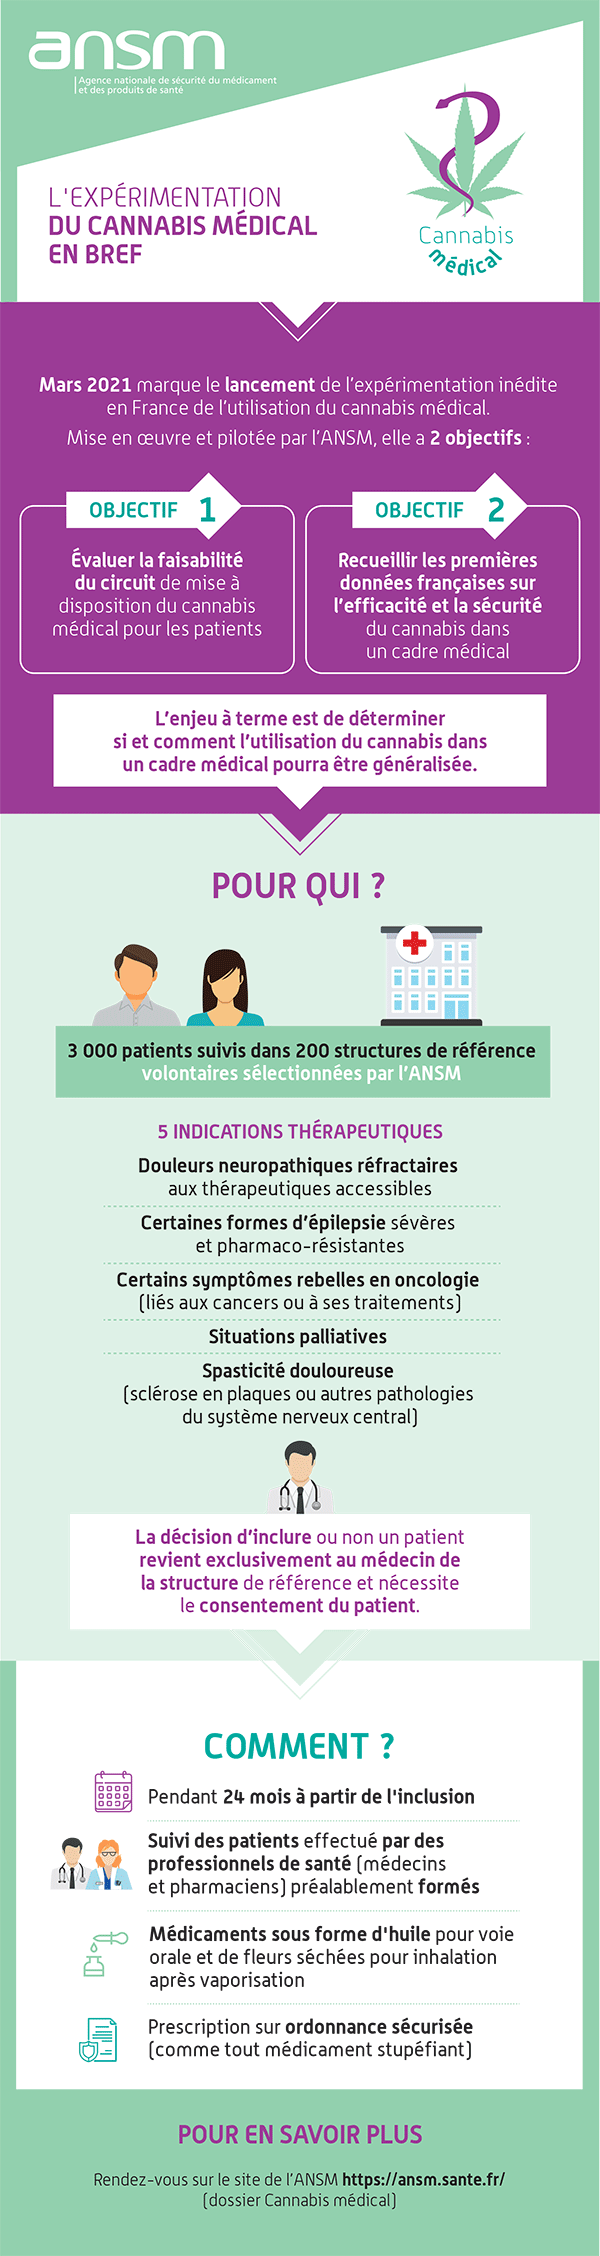 20210304_Cannabis_medical_Infographie_cadre-general